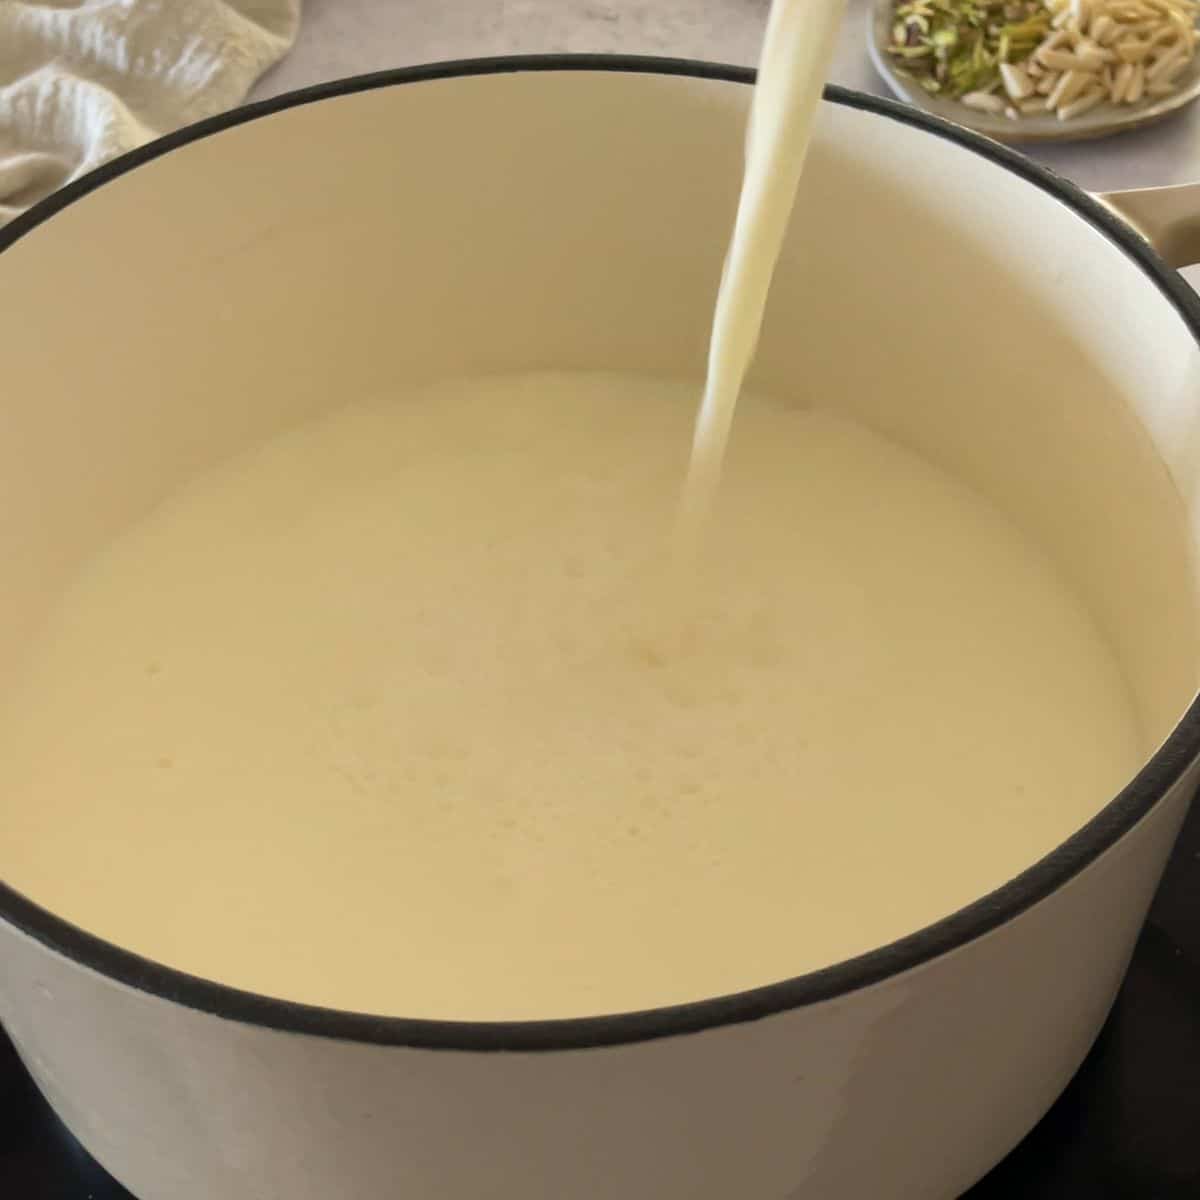 Milk being poured into a pot from above.